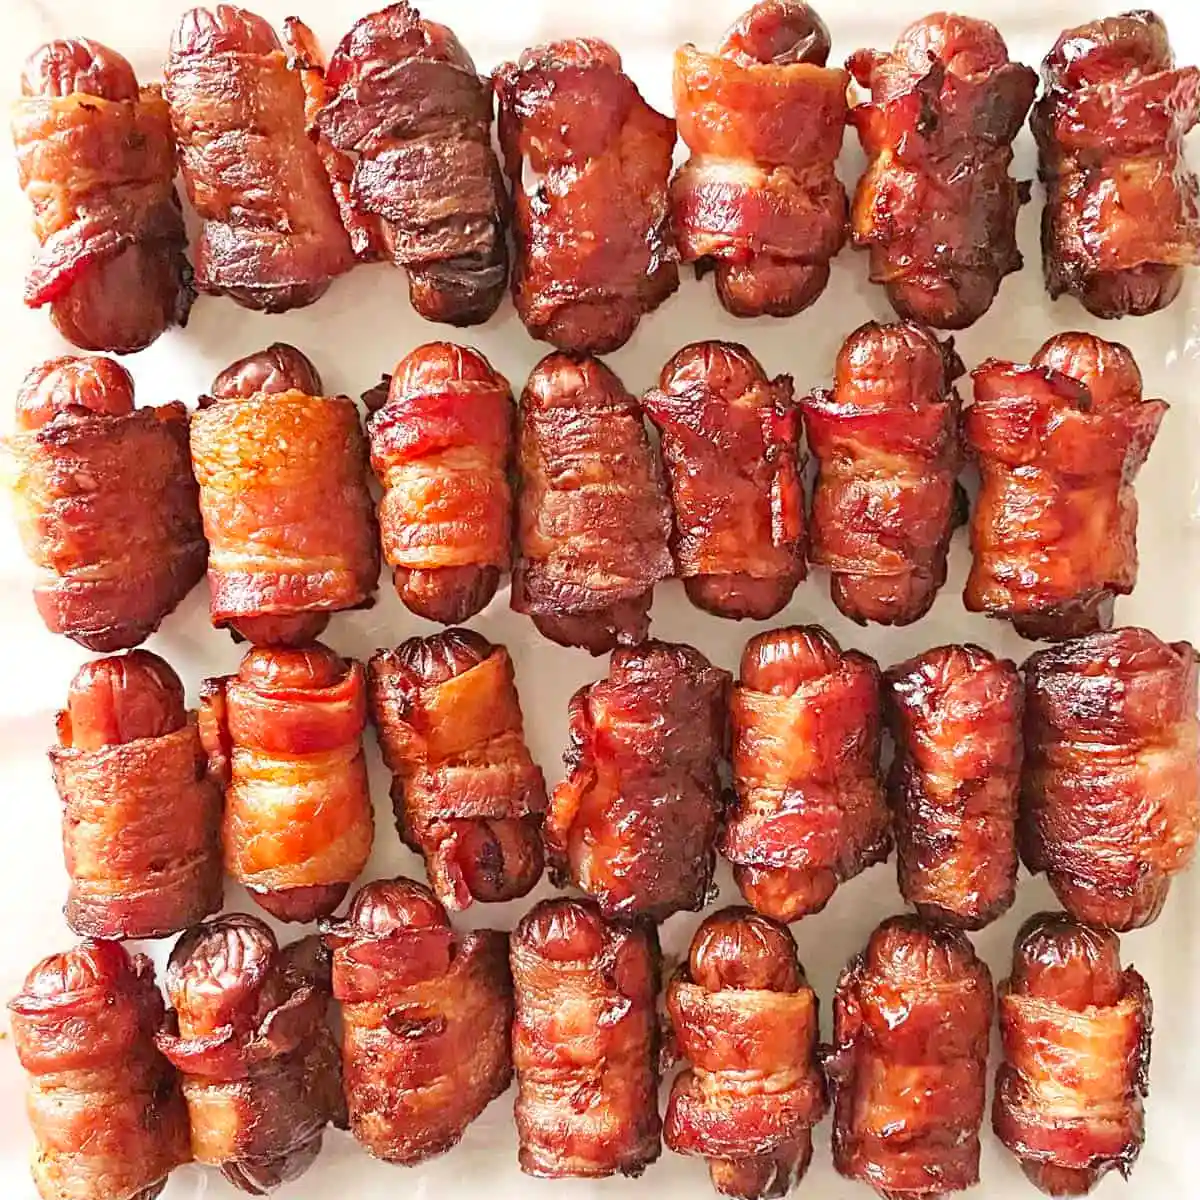 Little sausages wrapped in bacon crispy off the grill.